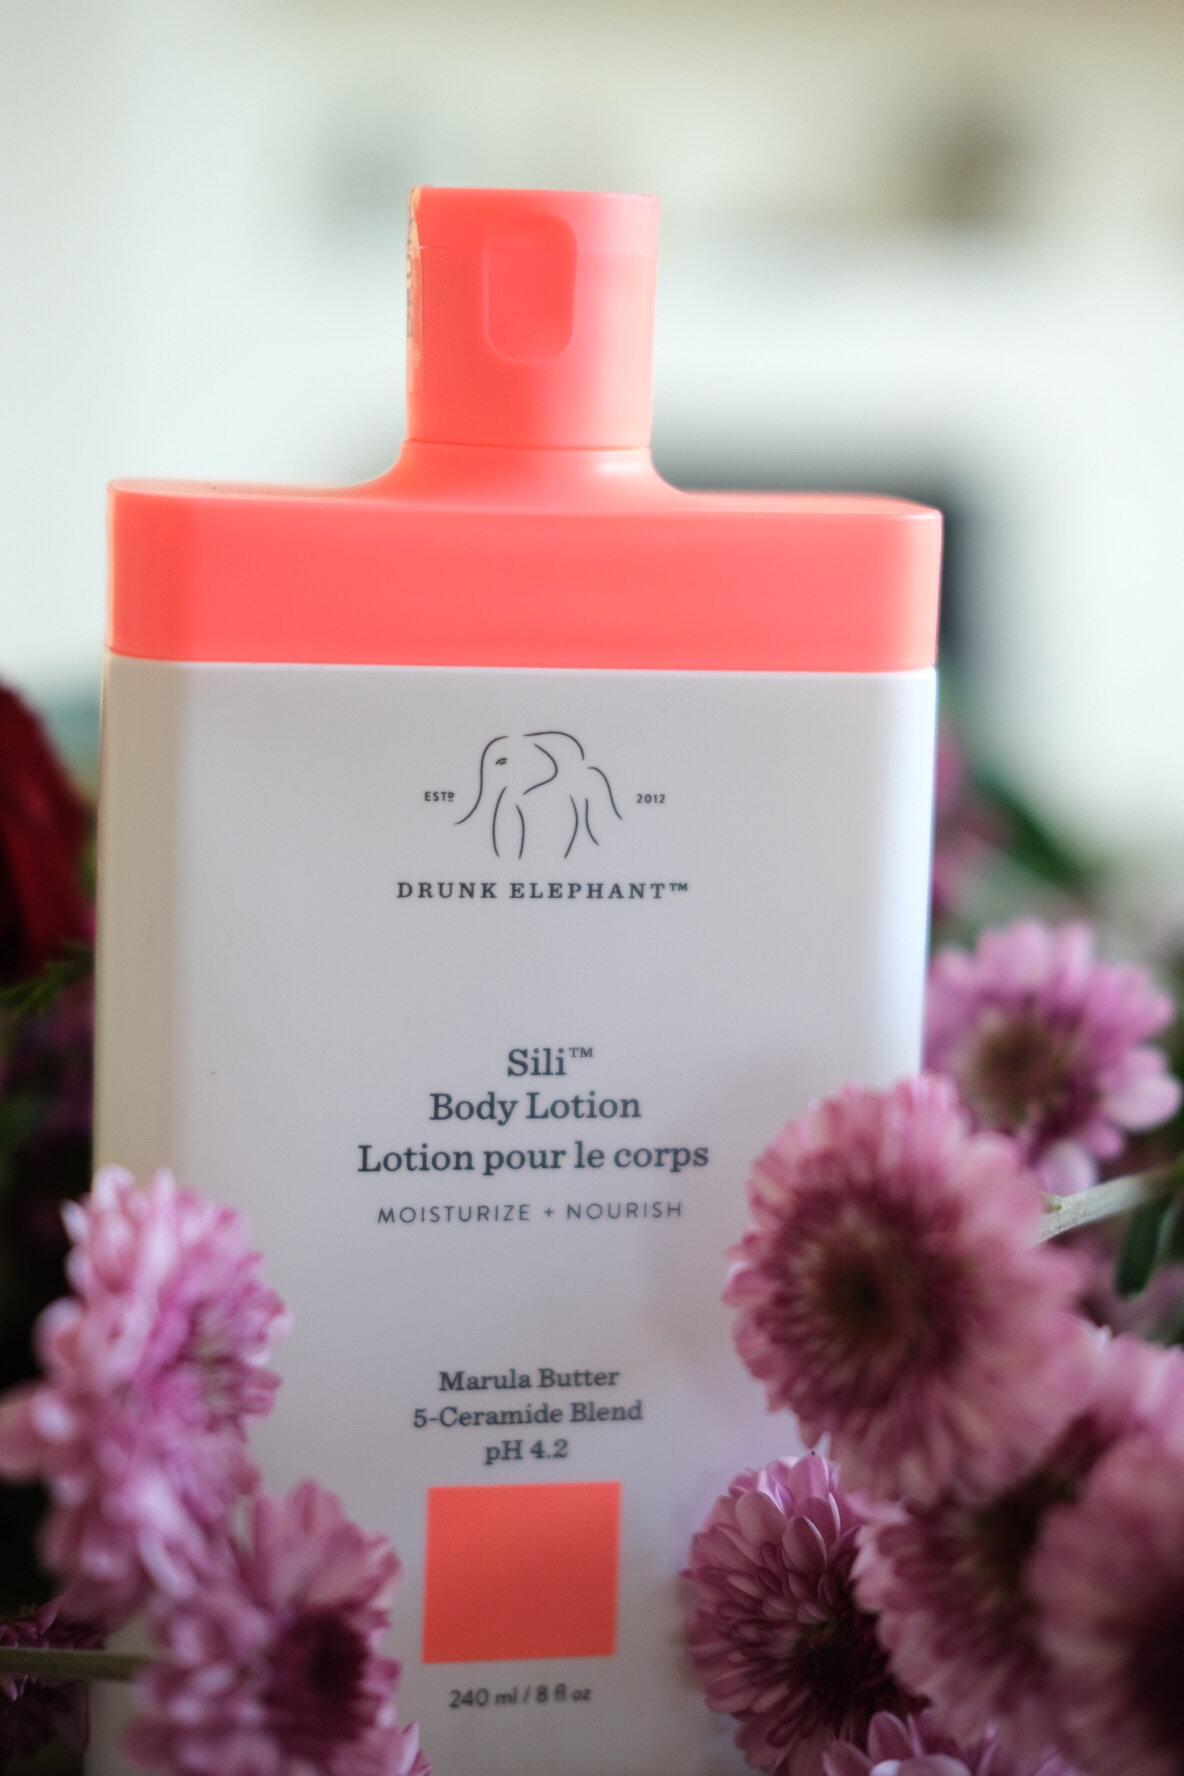 Find out everything that you need to know about Drunk Elephant Hair Care and Drunk Elephant Body Care in this Drunk Elephant hair care and body care review. In my Drunk Elephant reviews, you will find out how to use Drunk Elephant products, all the …